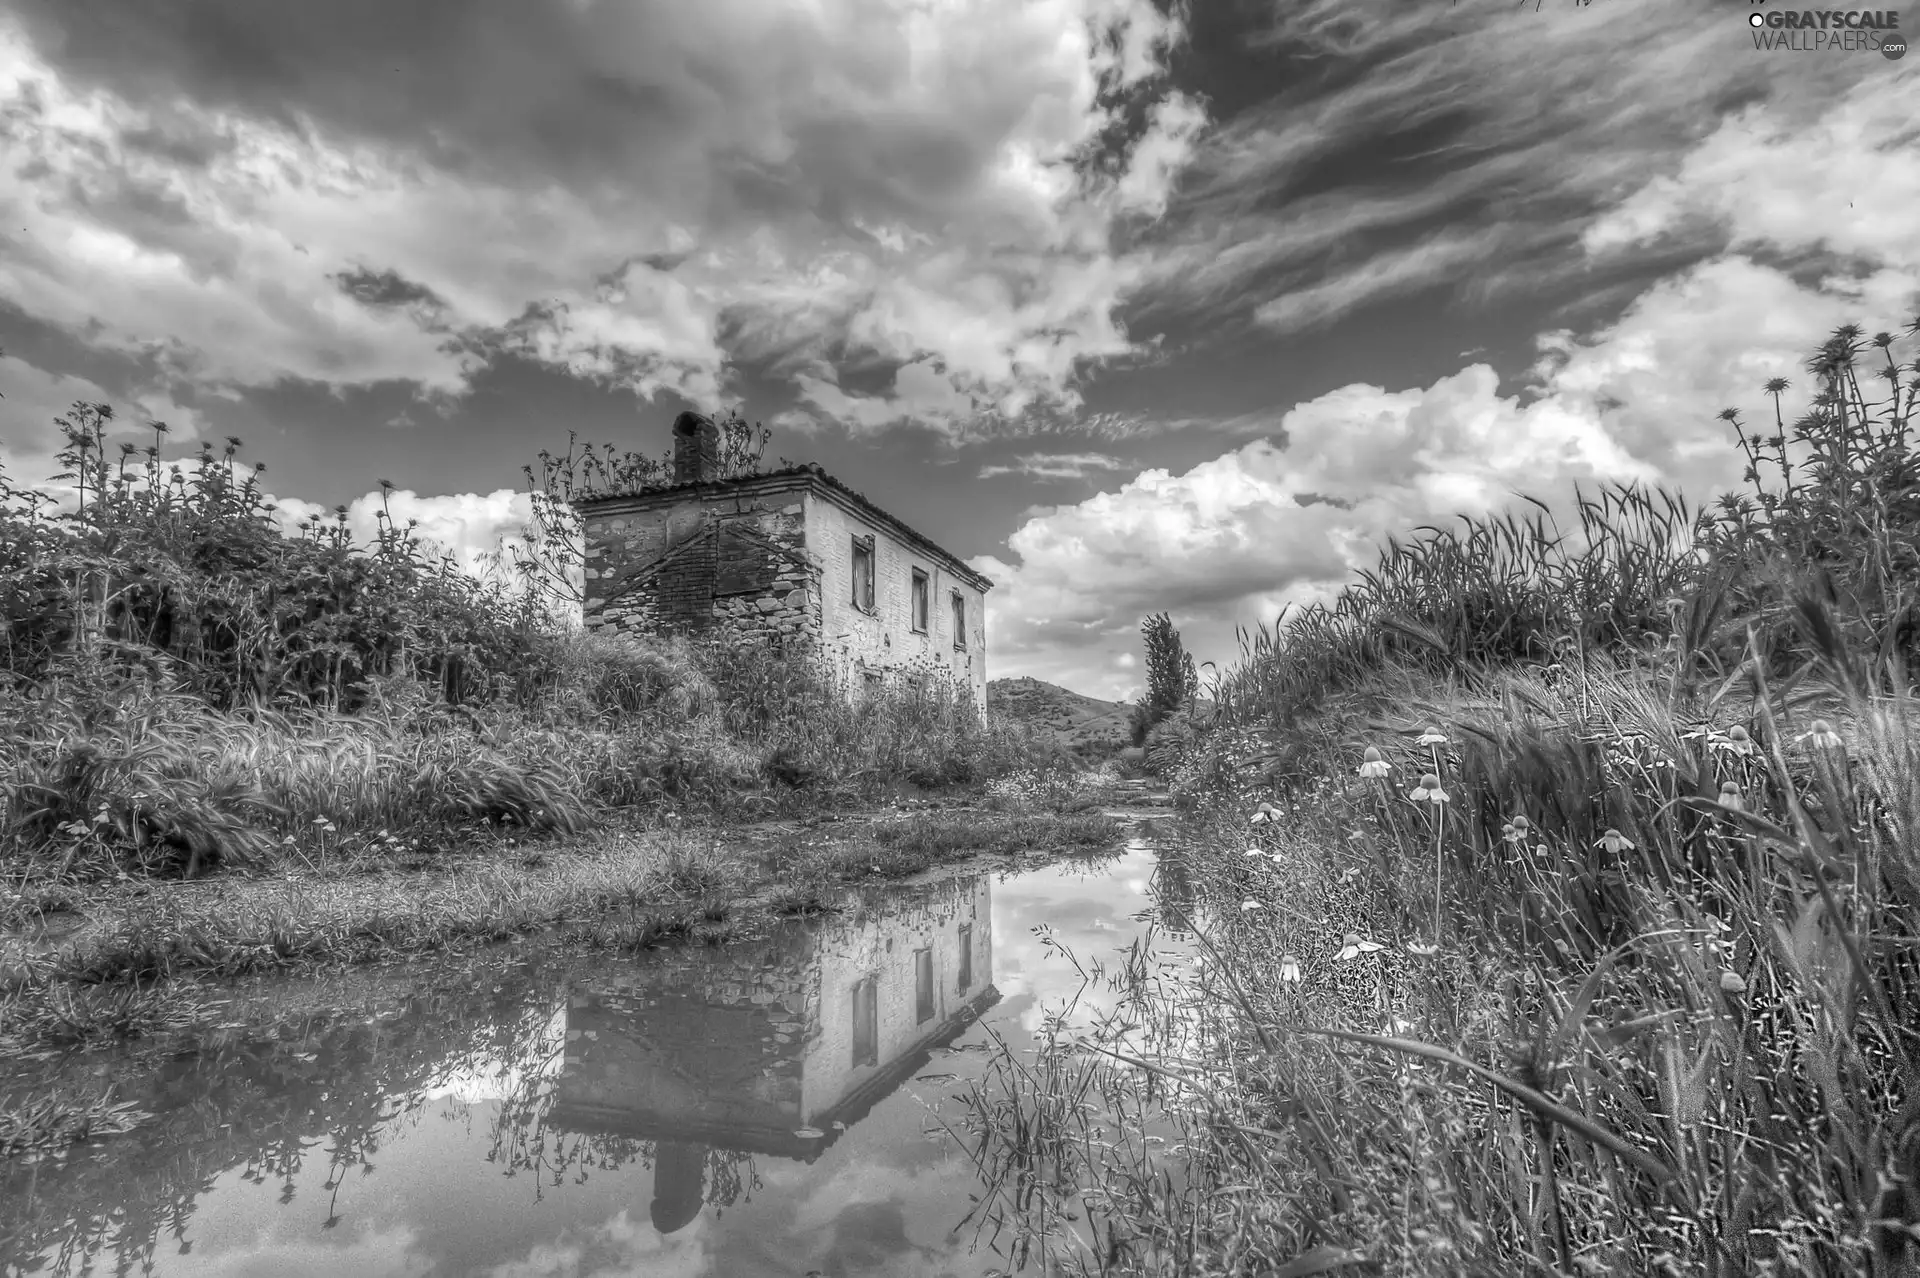 Plants, house, clouds, reflection, Sky, River